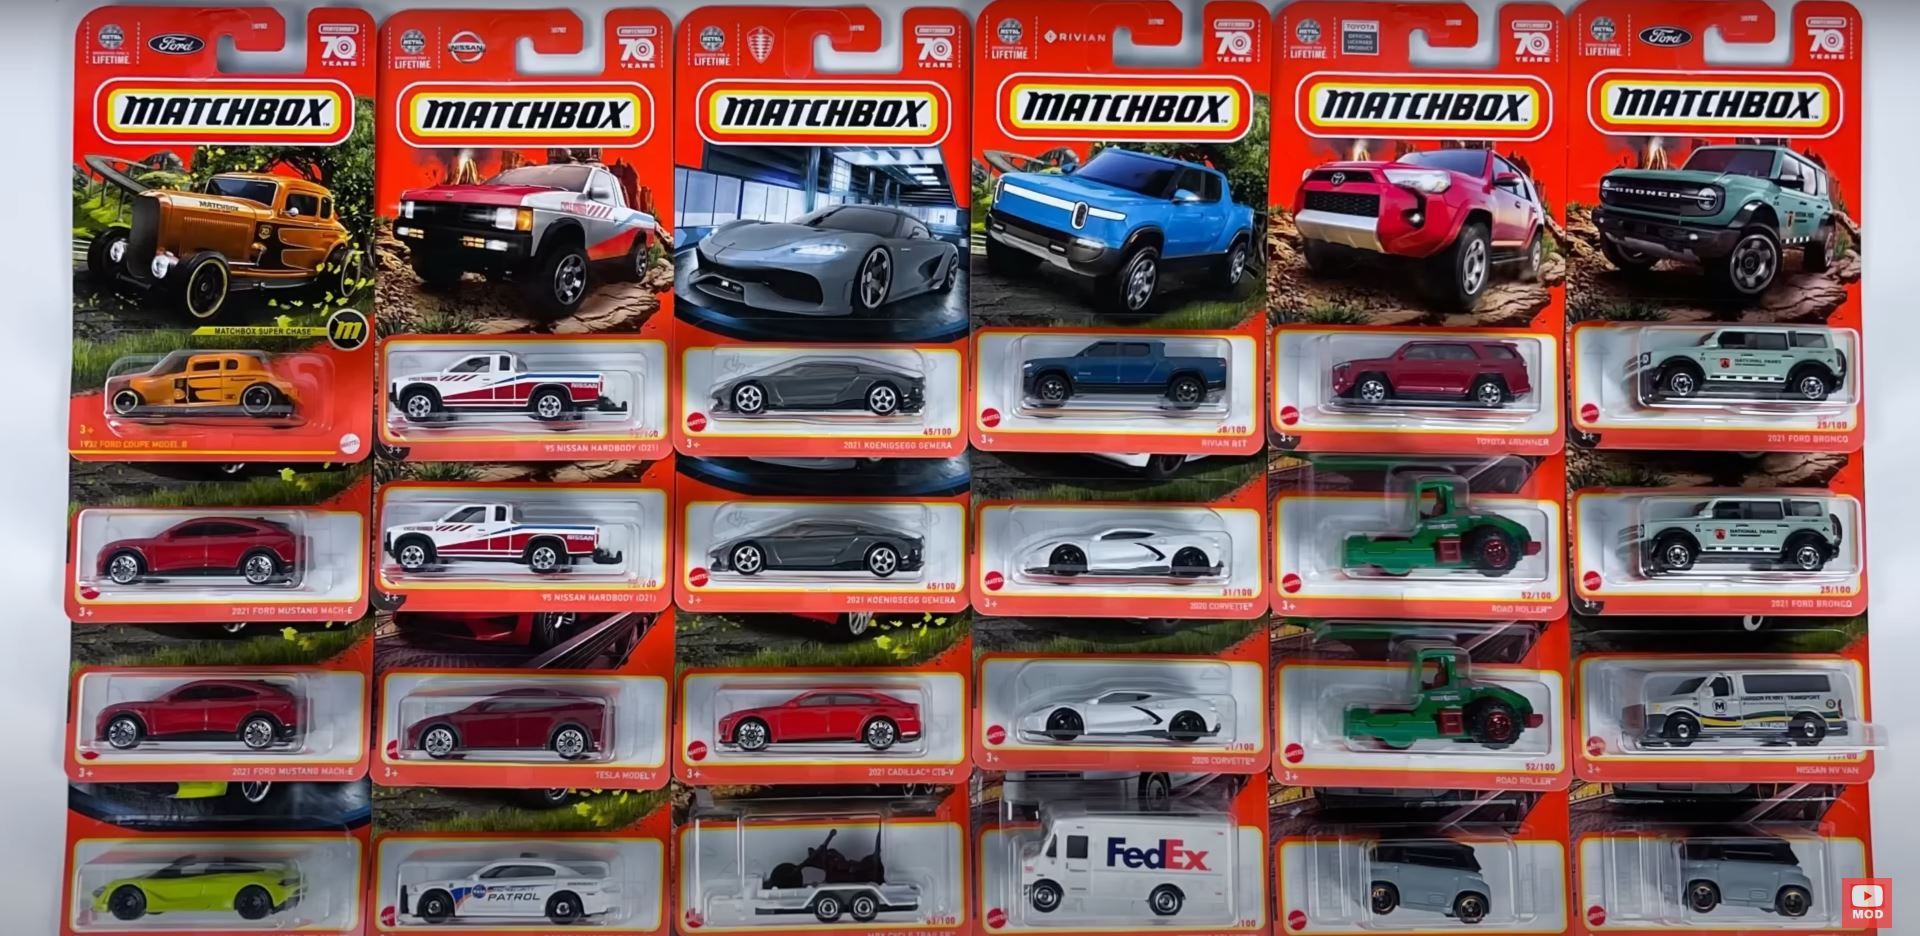 2023 Matchbox Series Is Almost Here, First Super Chase Is a 1932 Ford autoevolution